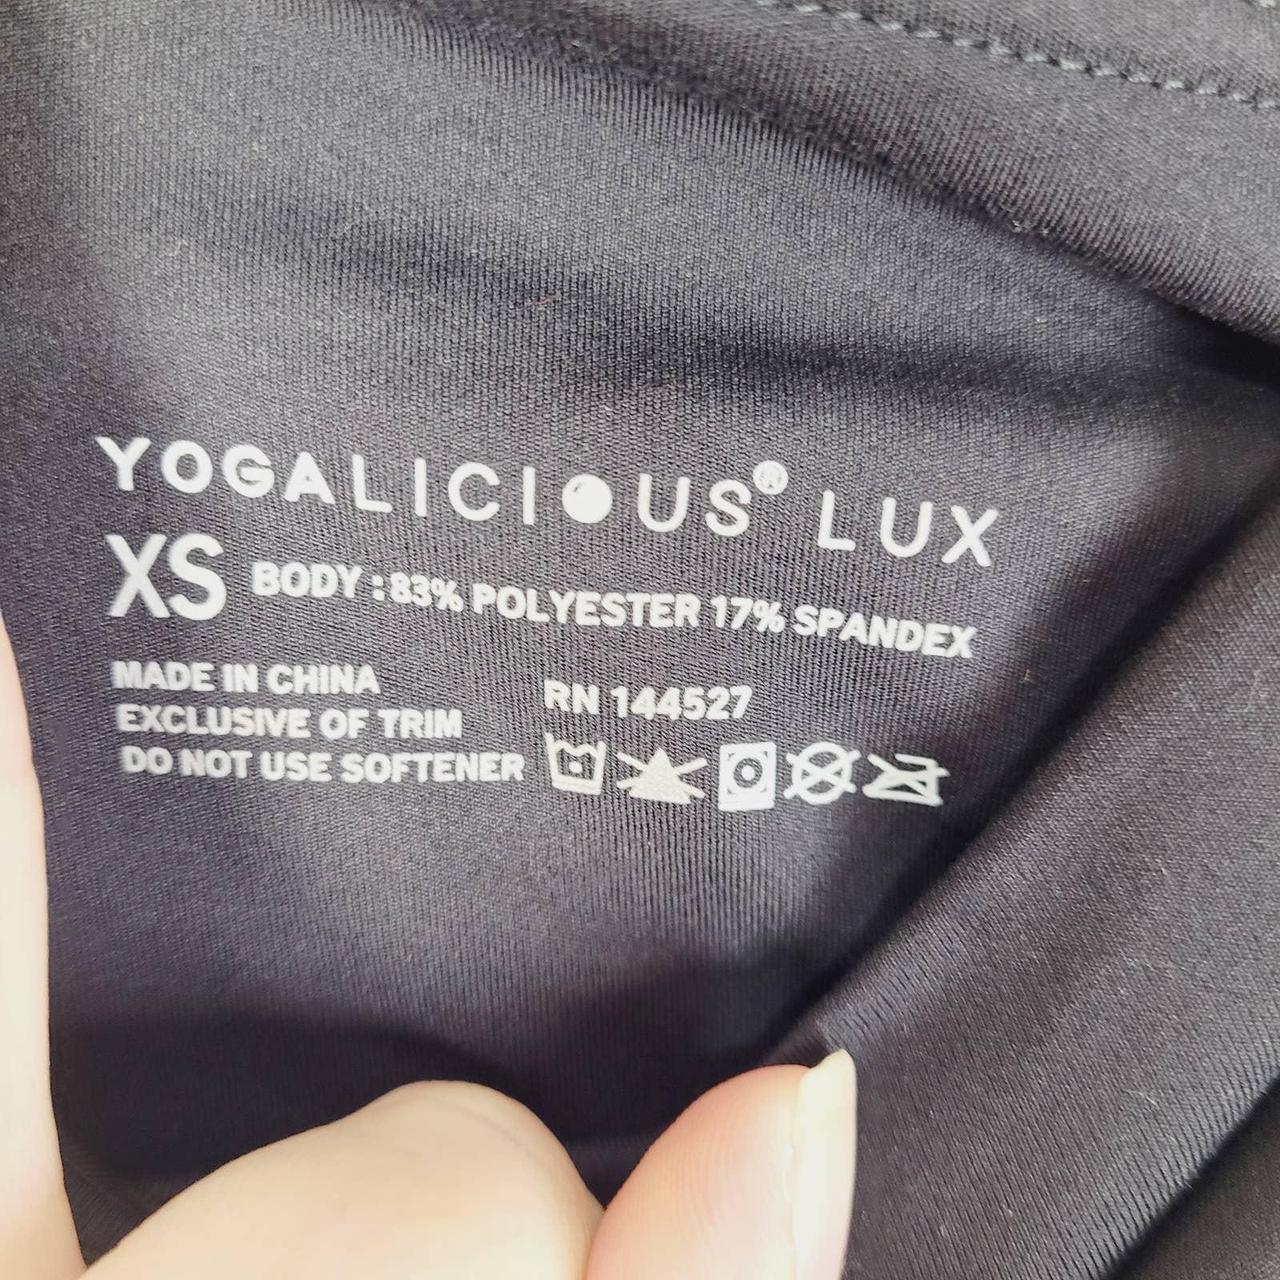 Yogalicious LUX soft, breathable fabric high rise - Depop